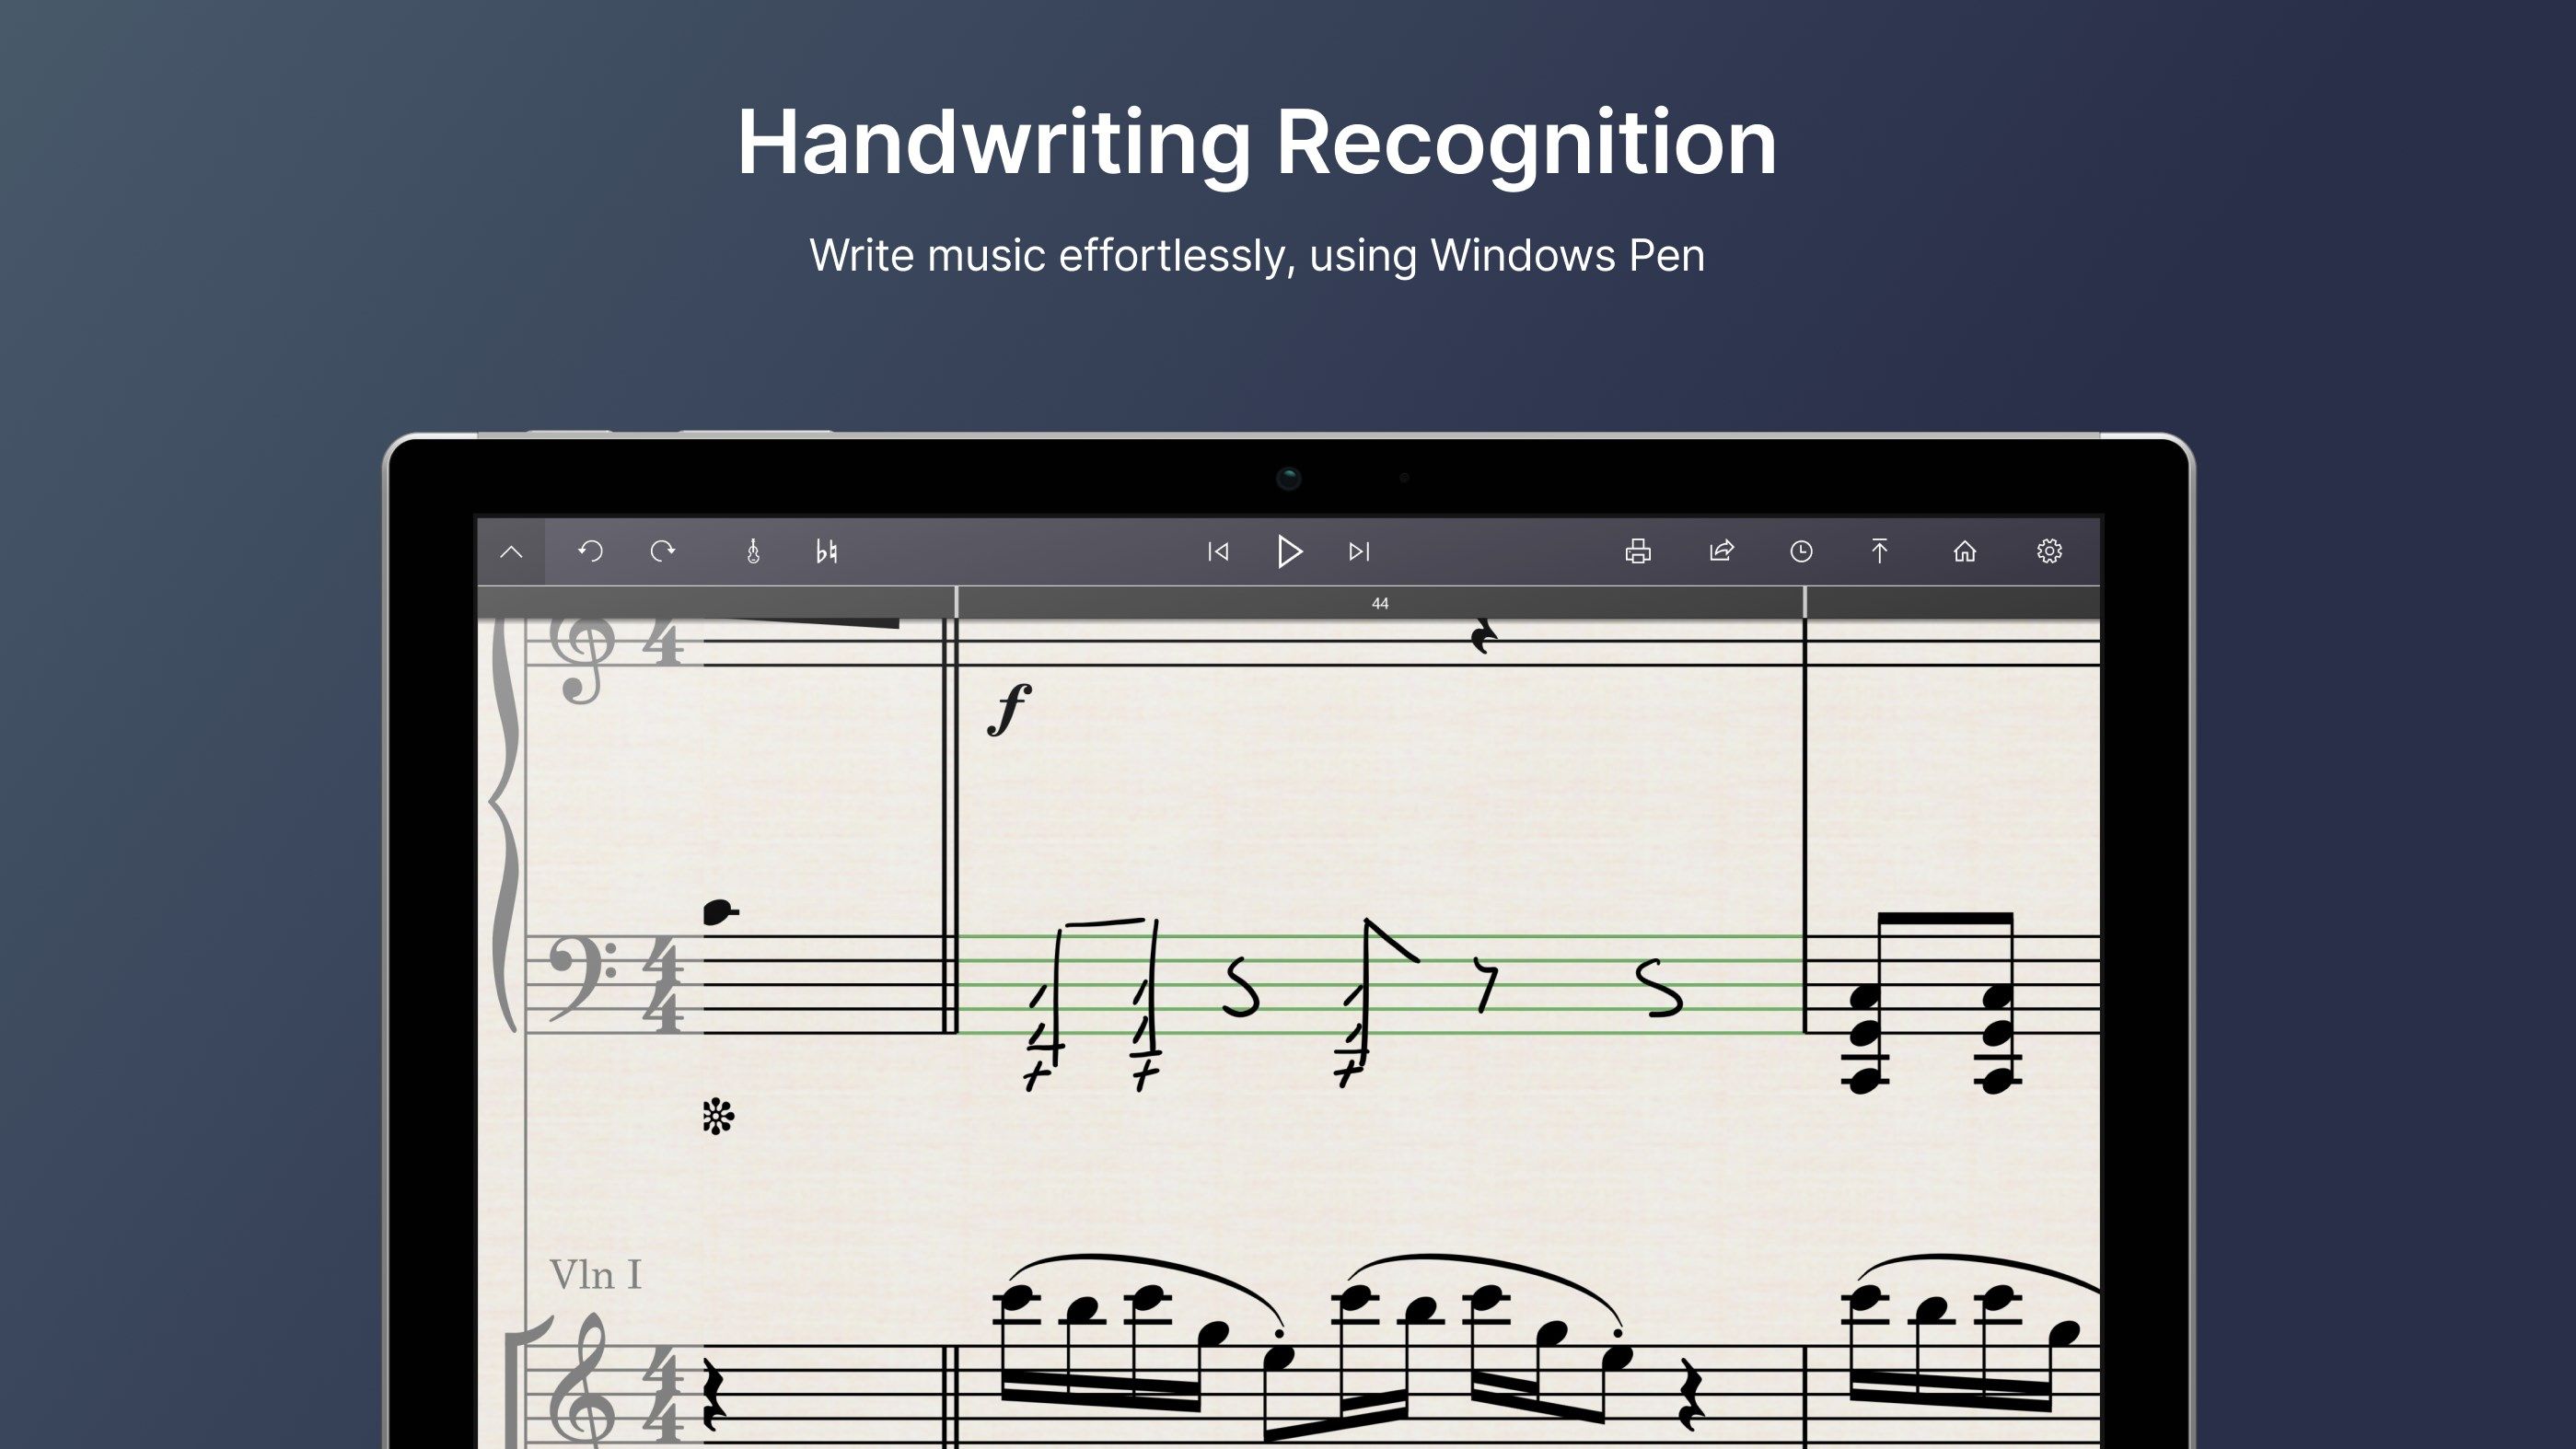 Handwriting Recognition: Write music effortlessly, using Windows Pen